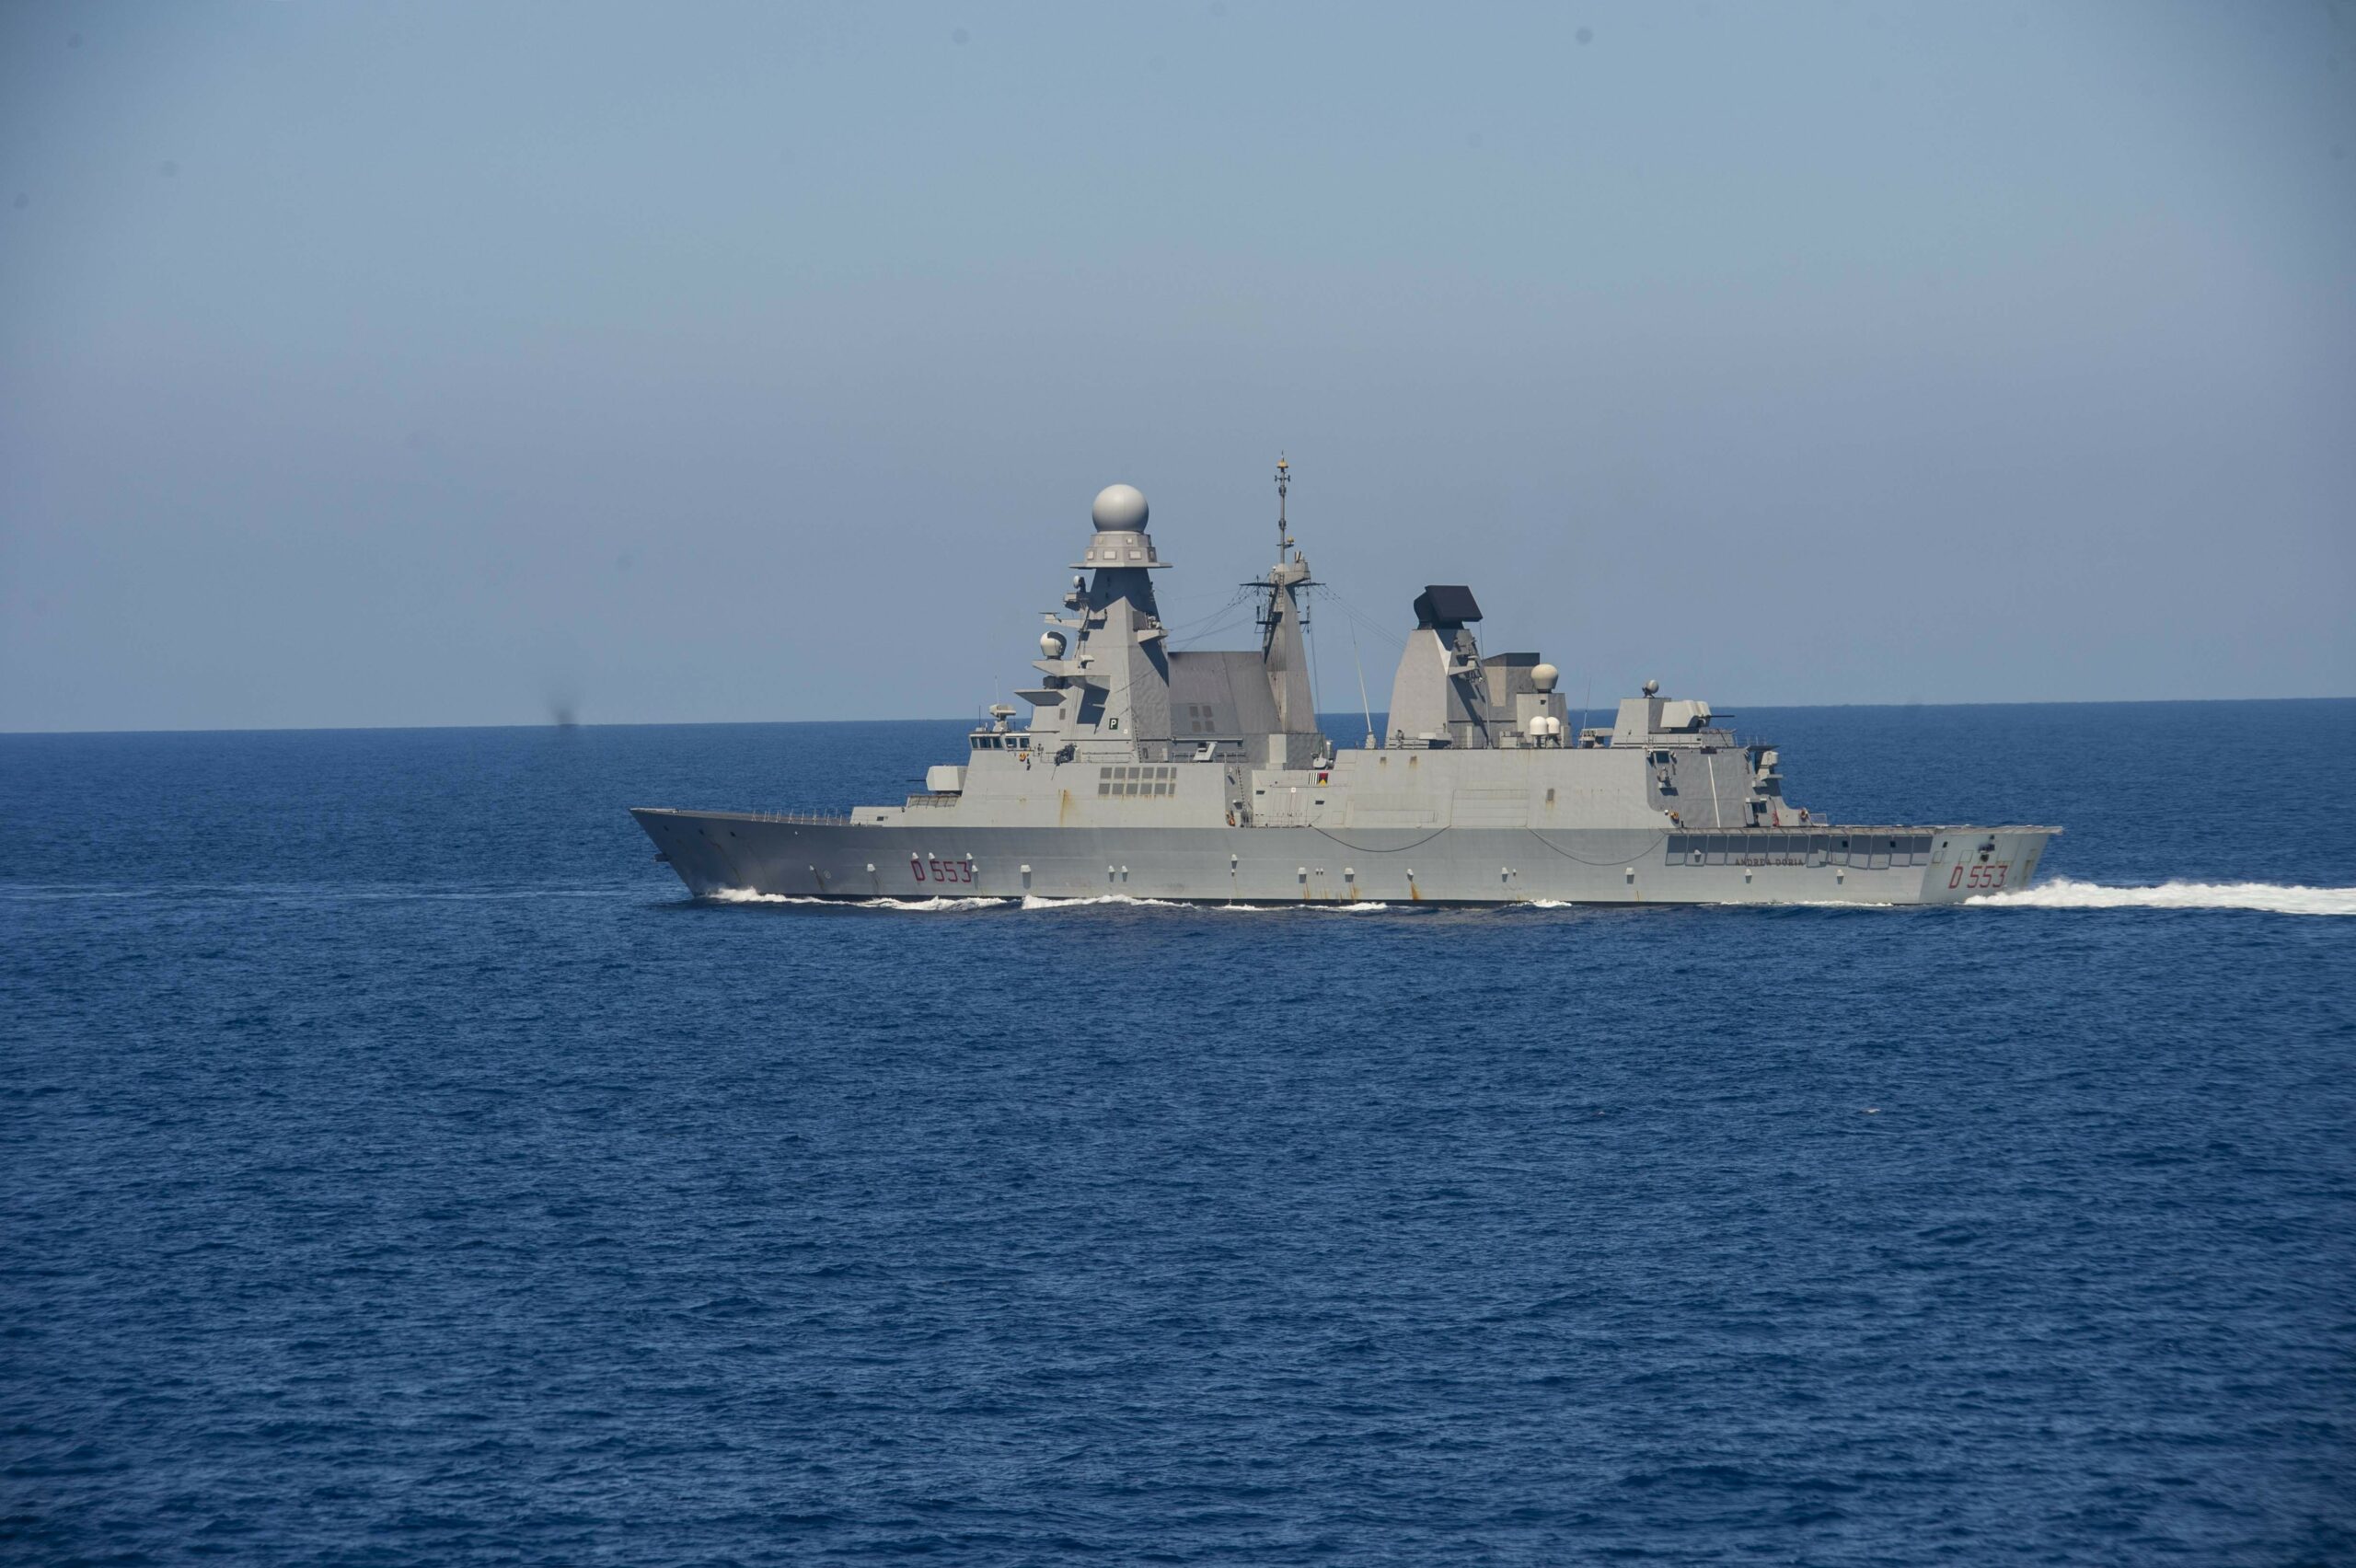 210703-N-RG587-1036 MEDITERRANEAN SEA (July 3, 2021) Italian Navy destroyer ITS Andrea Doria(D 553), sails alongside guided-missile cruiser USS Vella Gulf (CG 72), during operations in the Mediterranean Sea, July 3. Vella Gulf is operating with the Eisenhower Carrier Strike Group on a routine deployment in the U.S. Sixth Fleet area of operations in support of U.S. national interests and security in Europe and Africa. (U.S. Navy photo by Mass Communication Specialist 2nd Class Dean M. Cates)